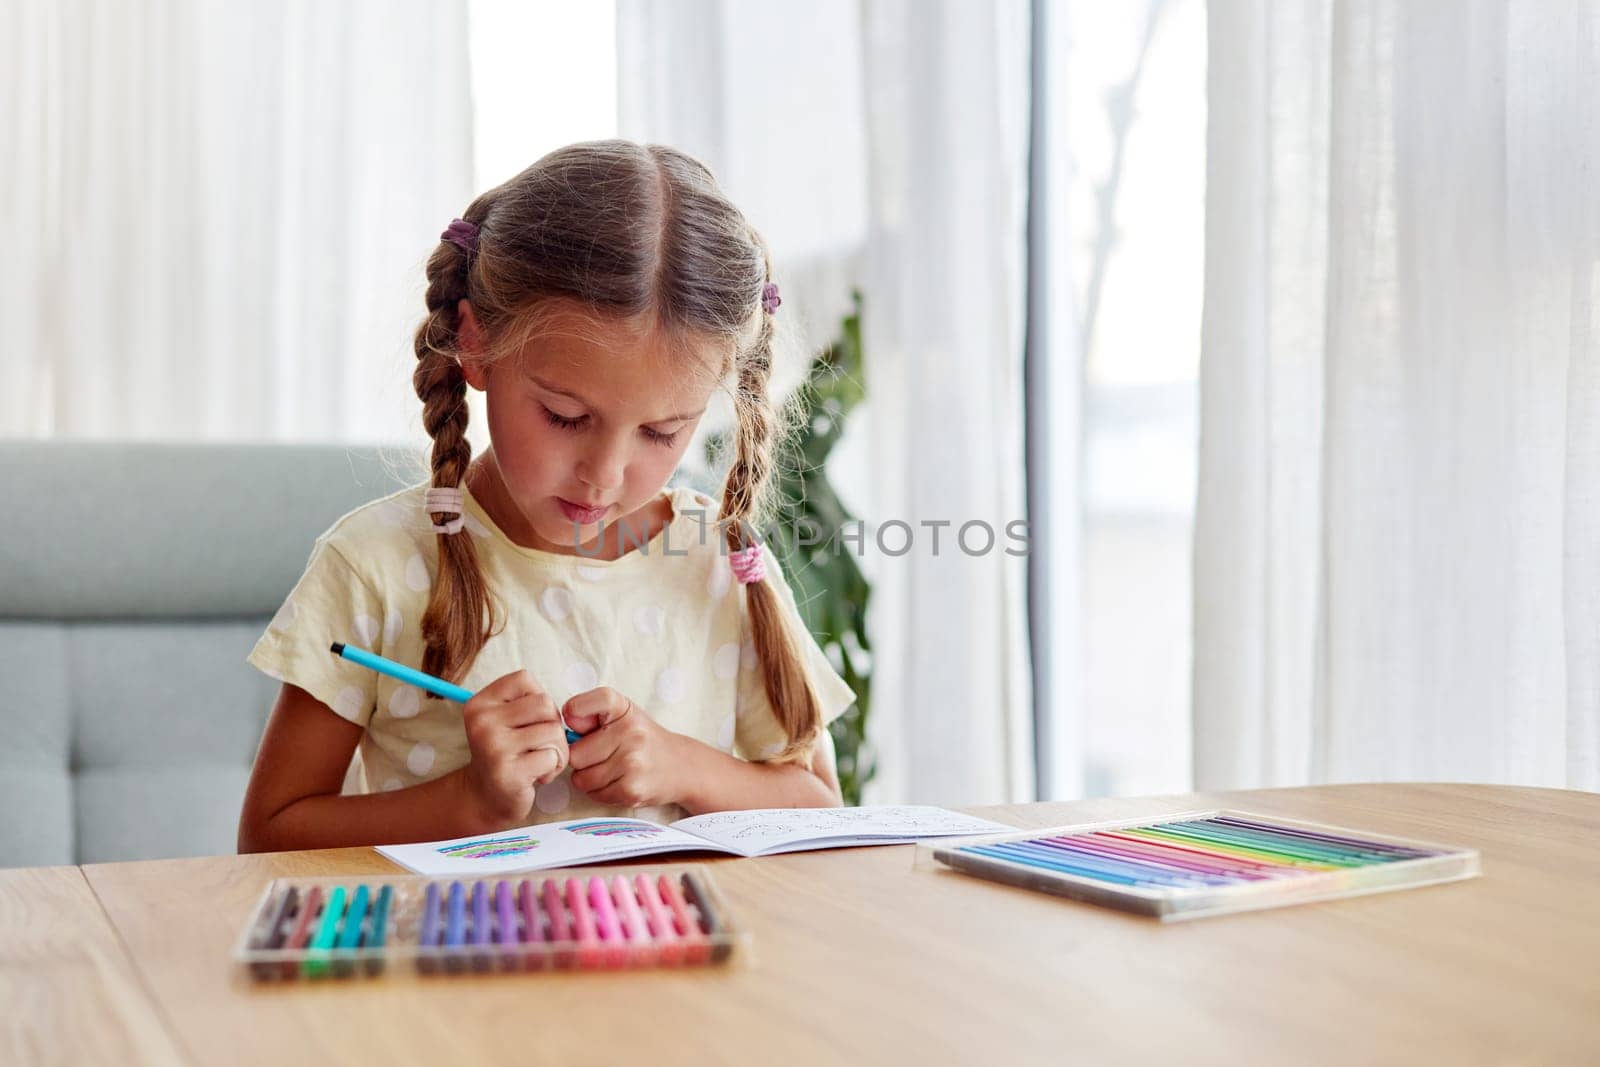 Little girl with braids chooses bright felt-tip pen to draw picture. Hobby and creative personality. Focused child drawing in calm atmosphere